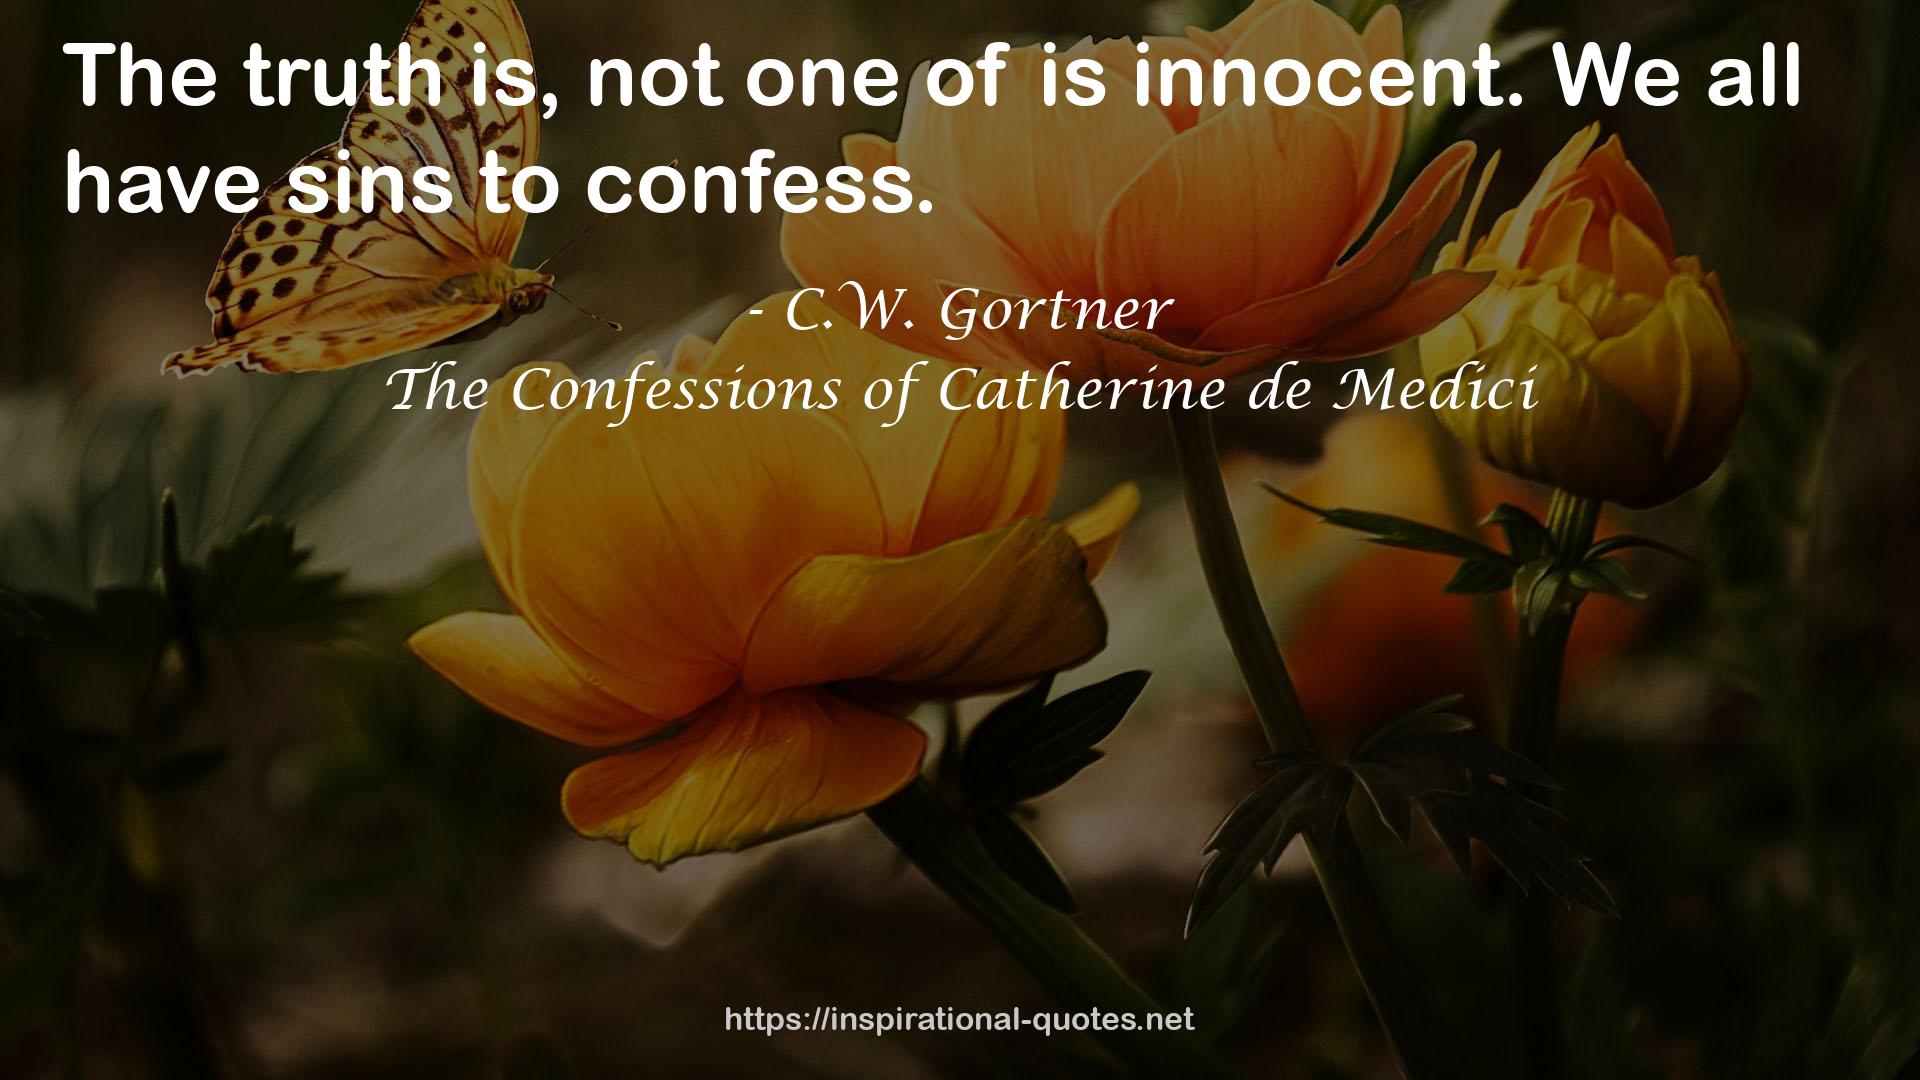 The Confessions of Catherine de Medici QUOTES